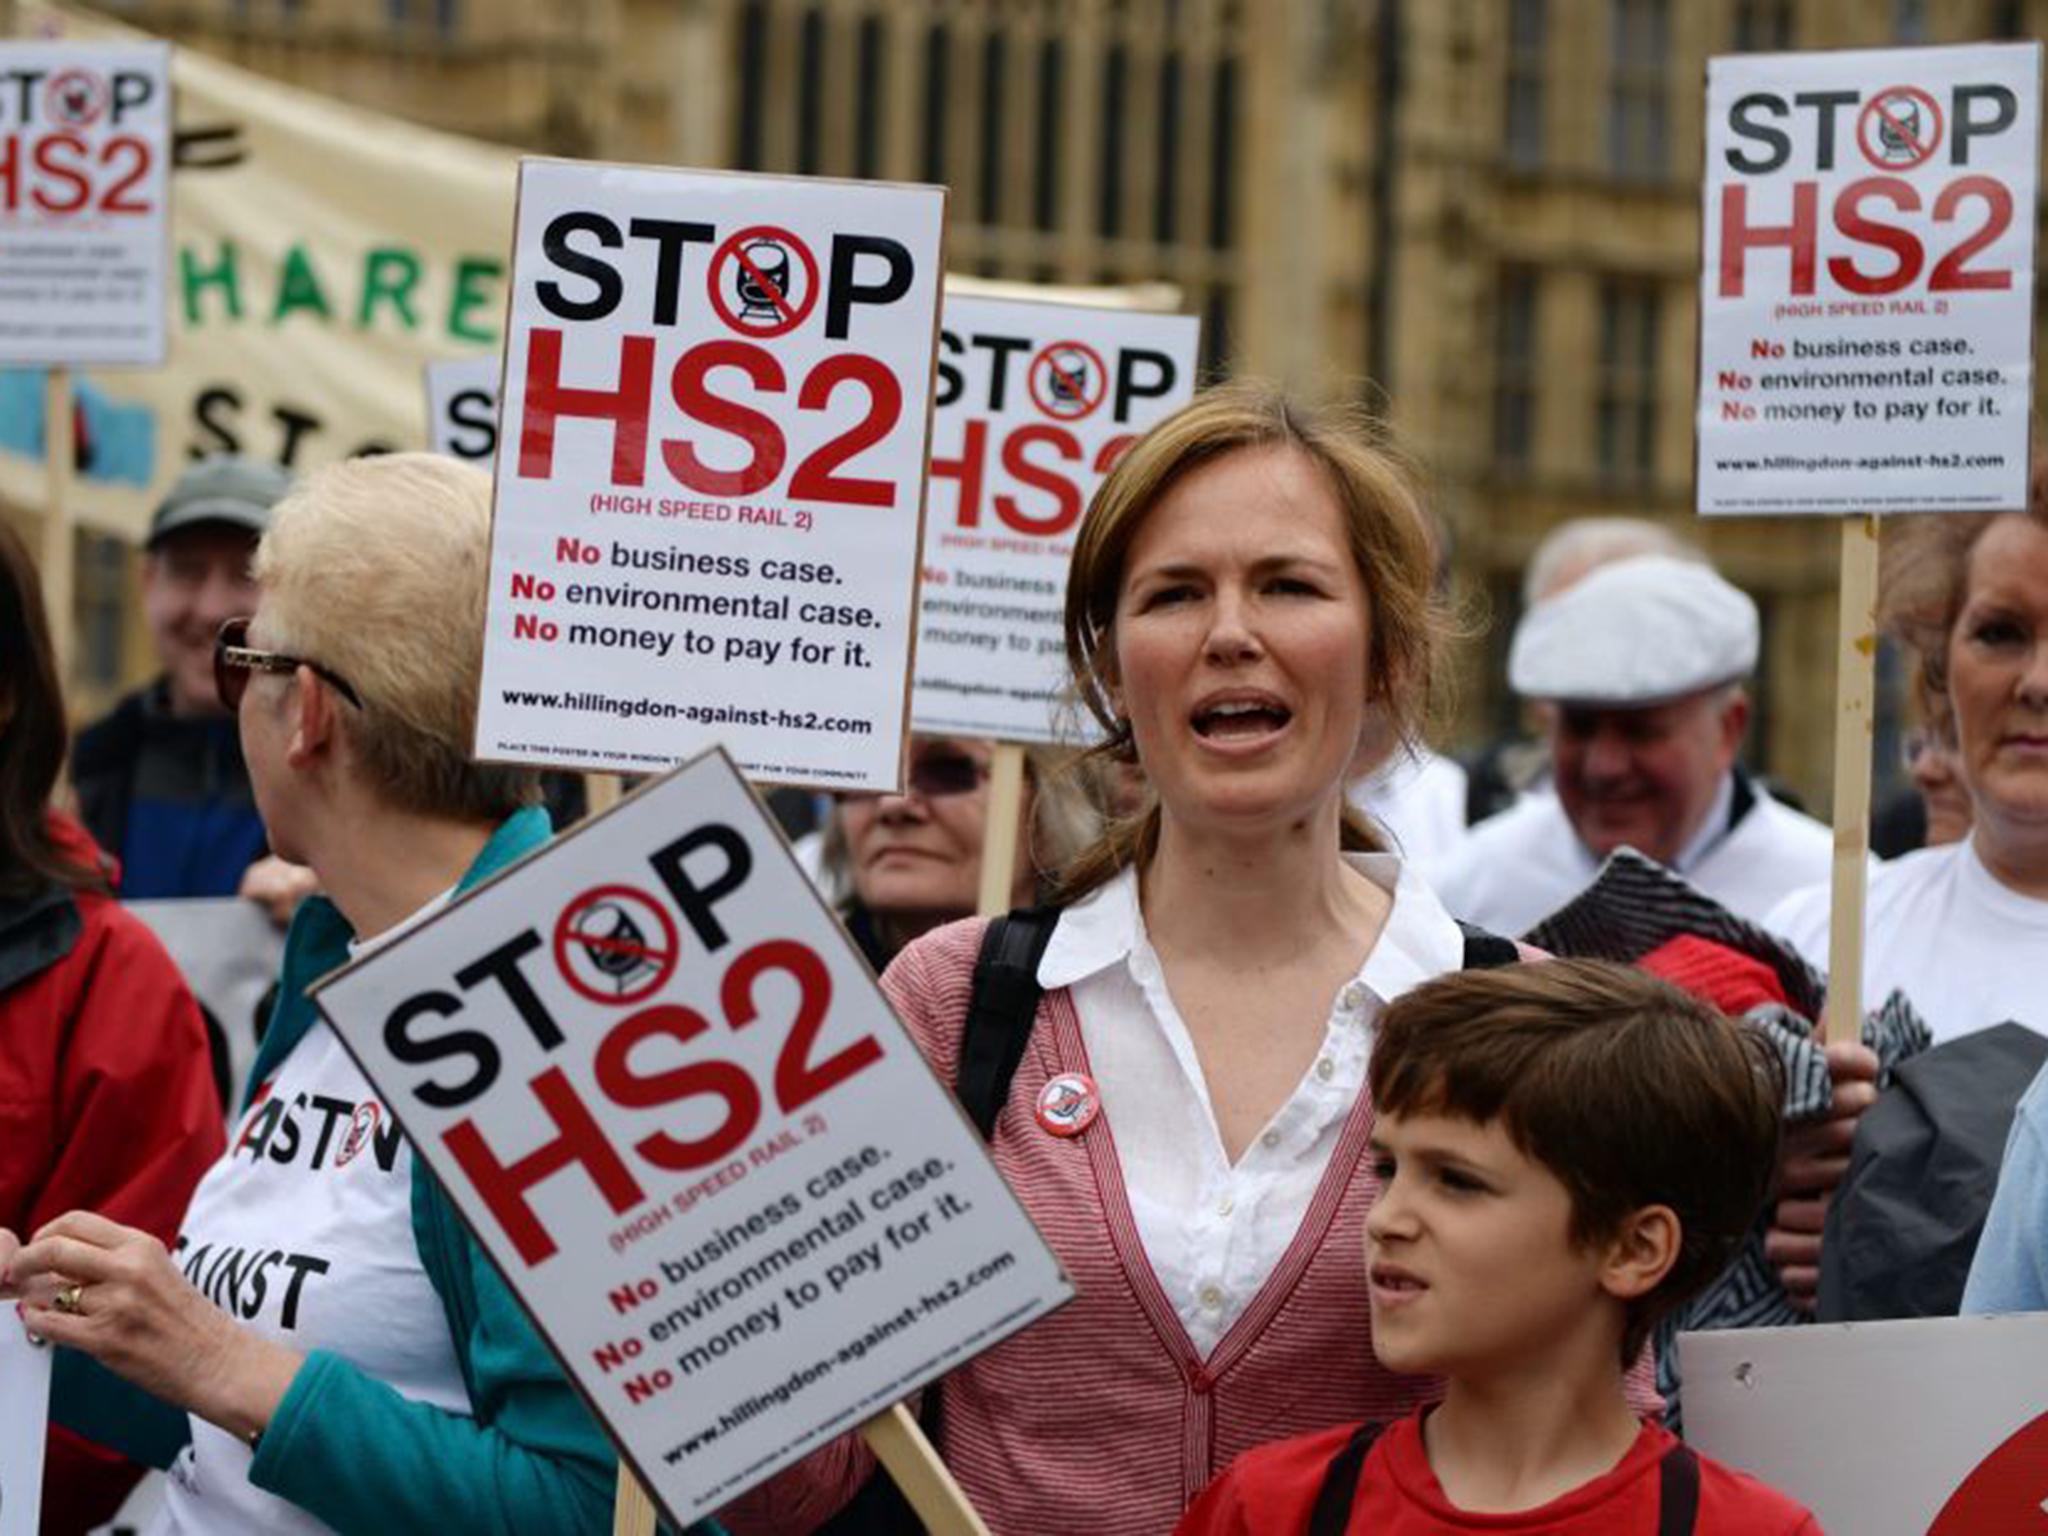 The debate over HS2 highlights the tension between local communities and national interest over big infrastructure projects